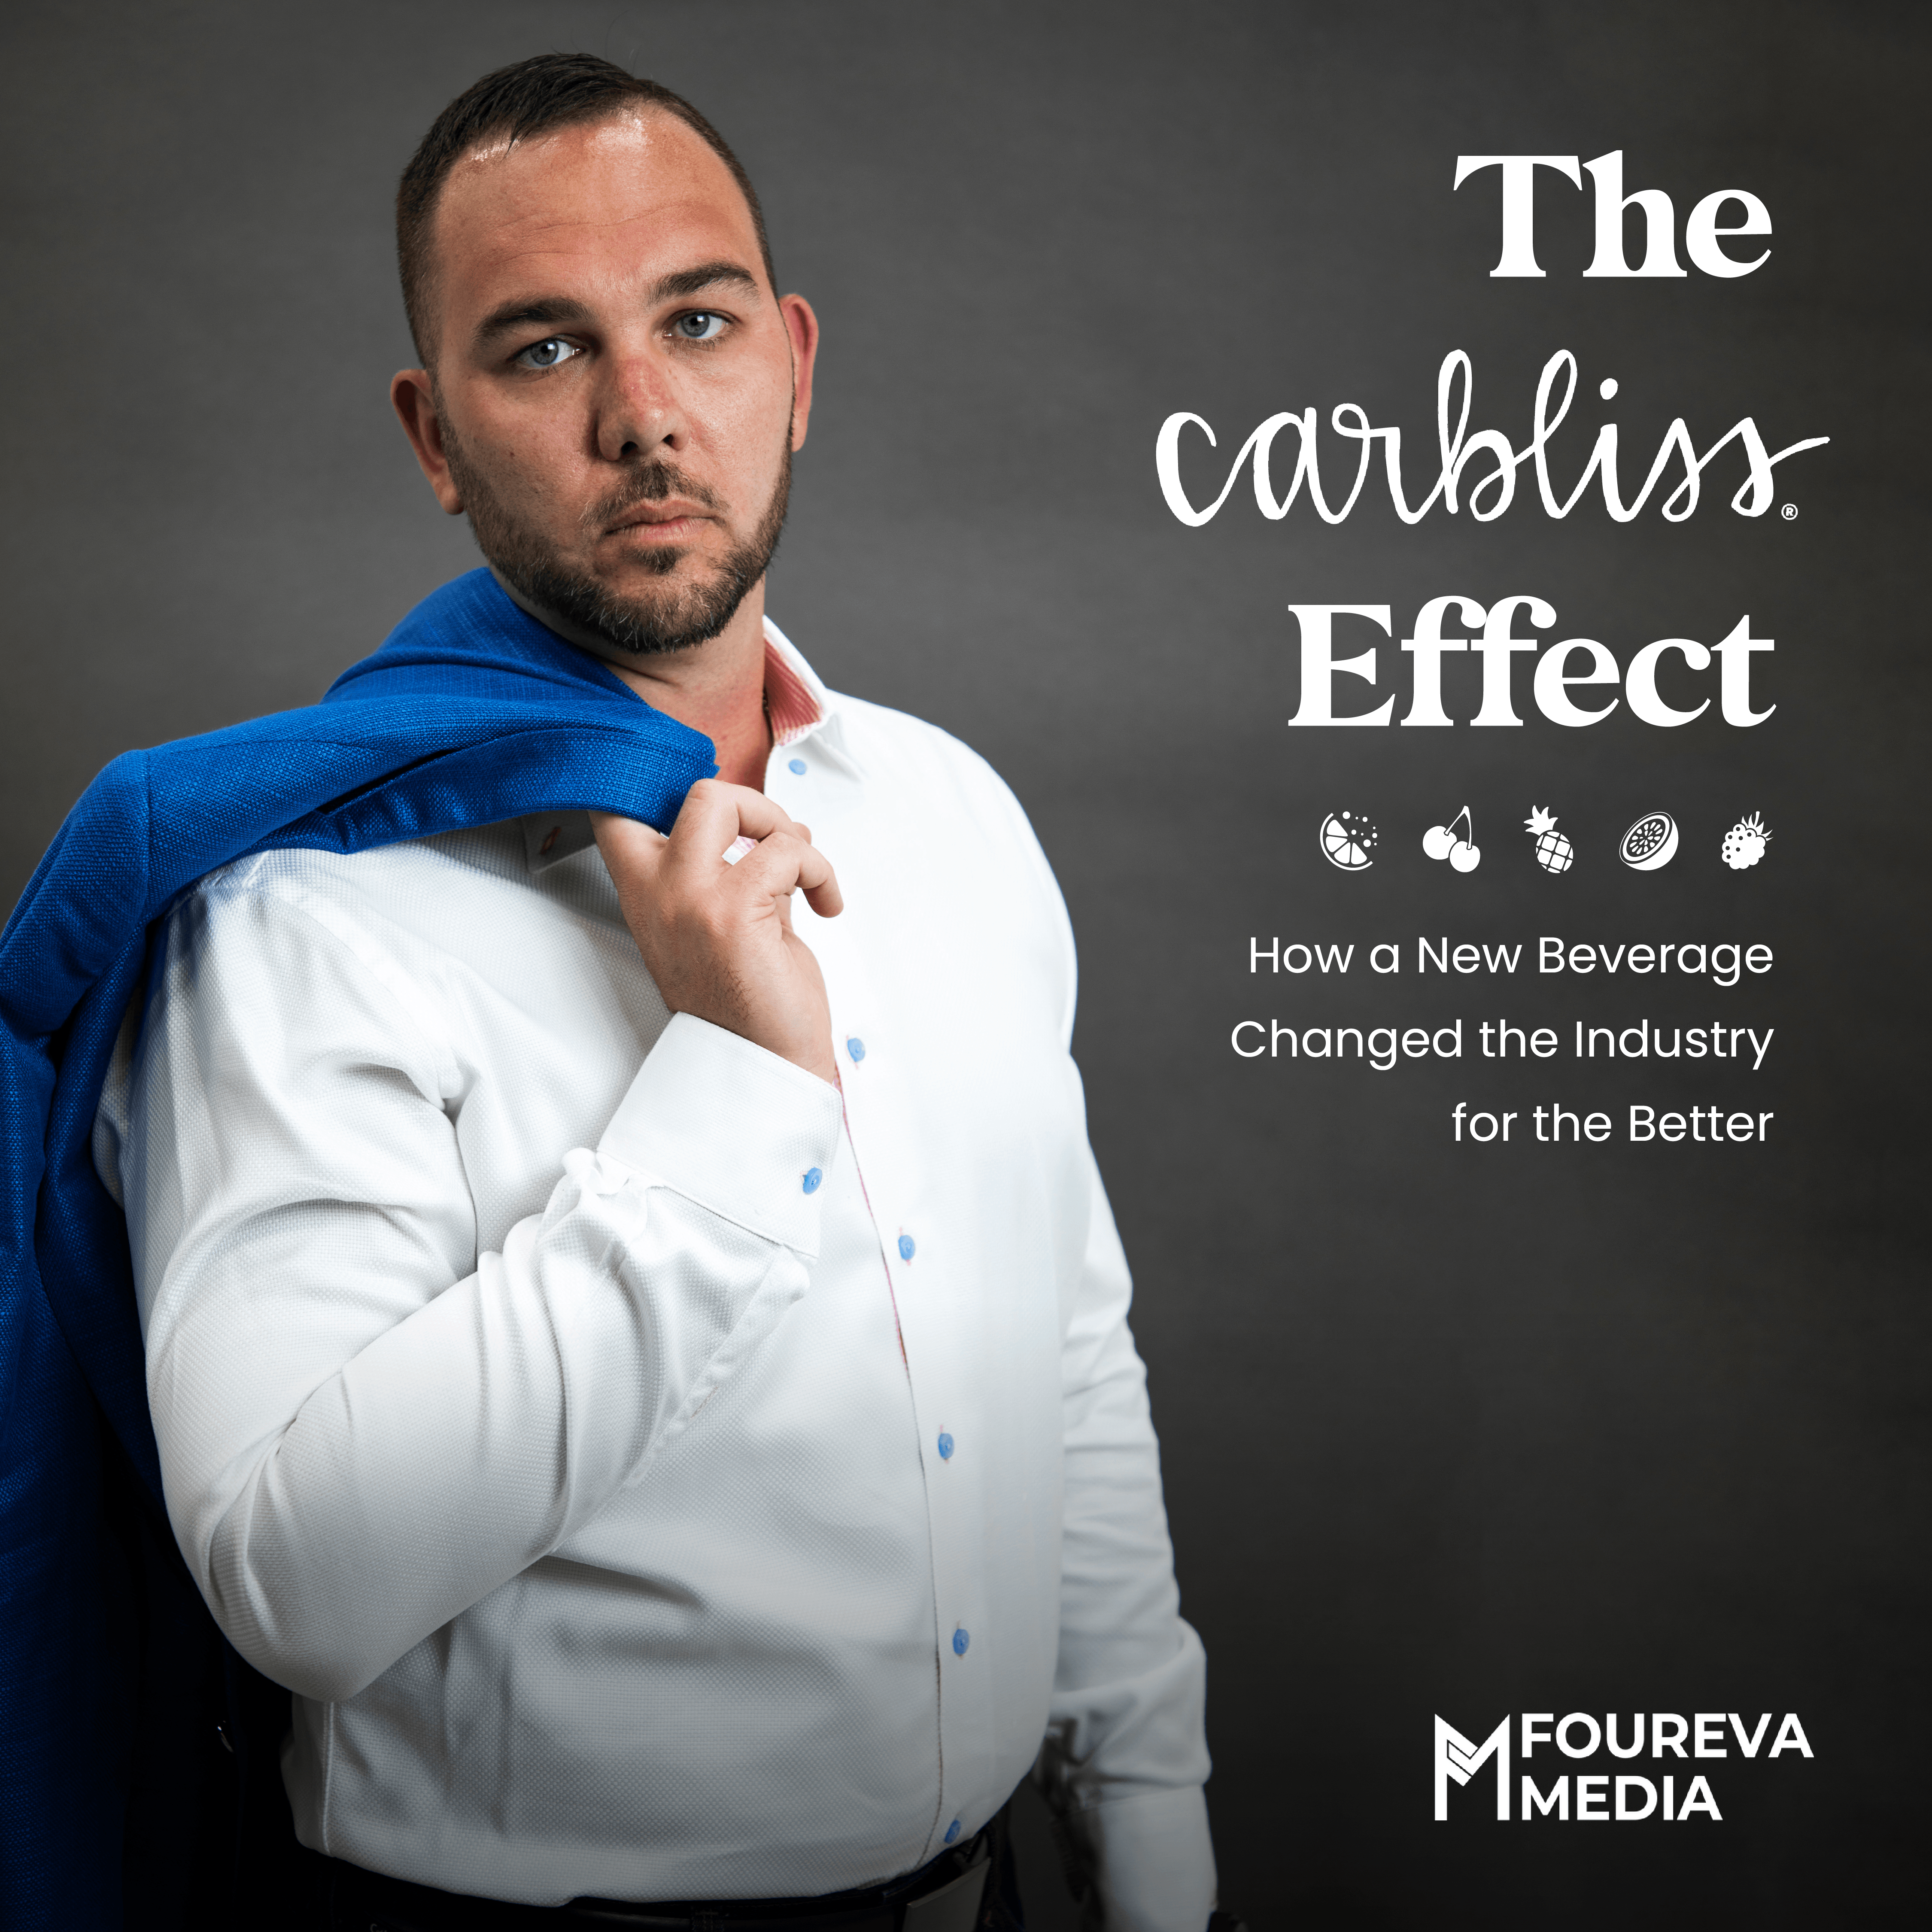 The Carbliss Effect with Adam Kroener and Foureva Media